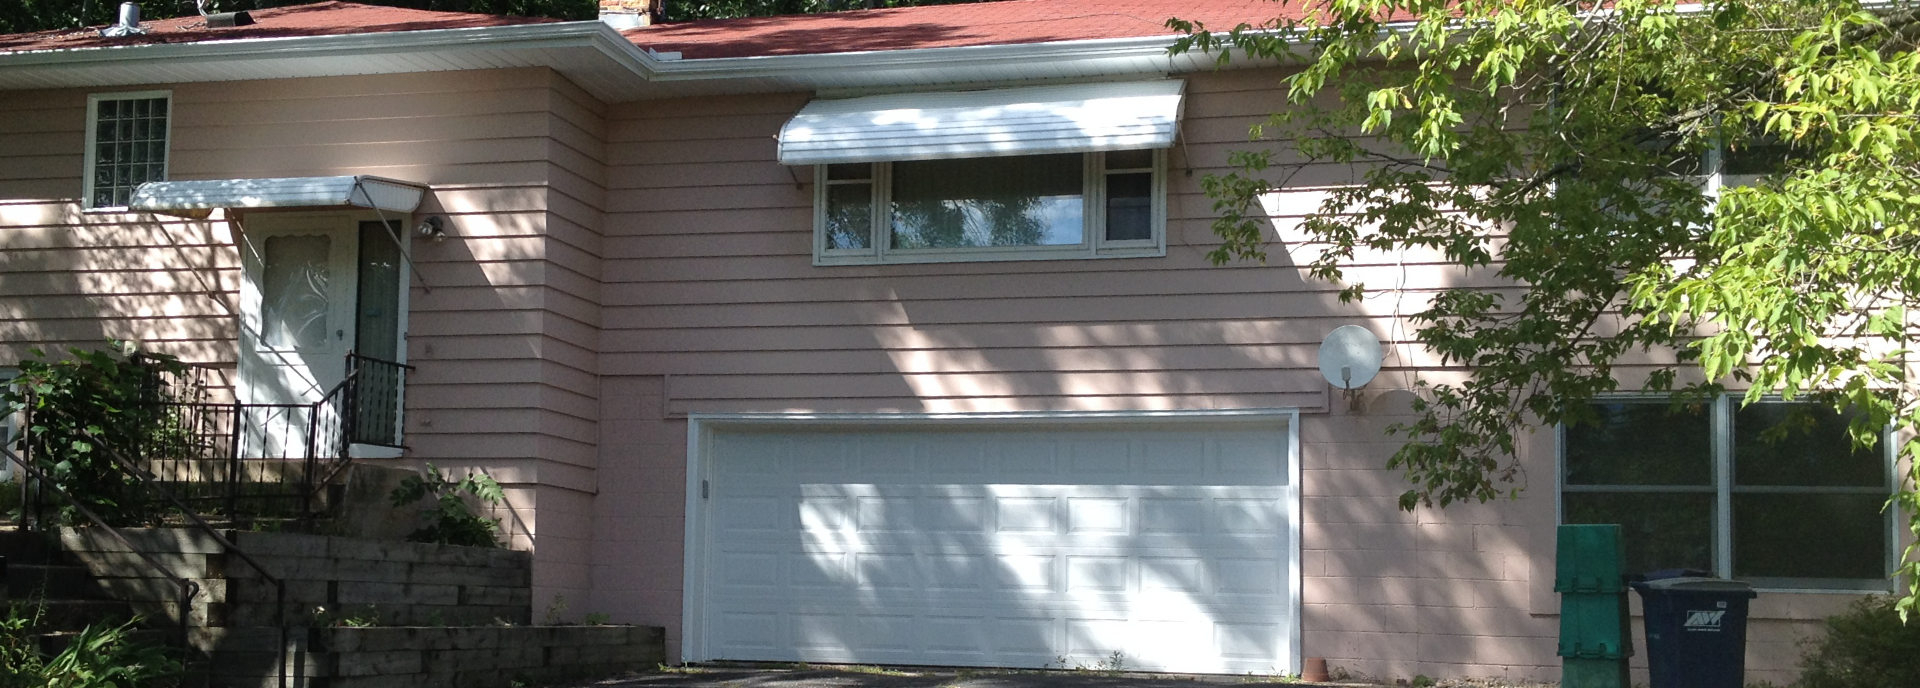 Residential Exterior Painting After